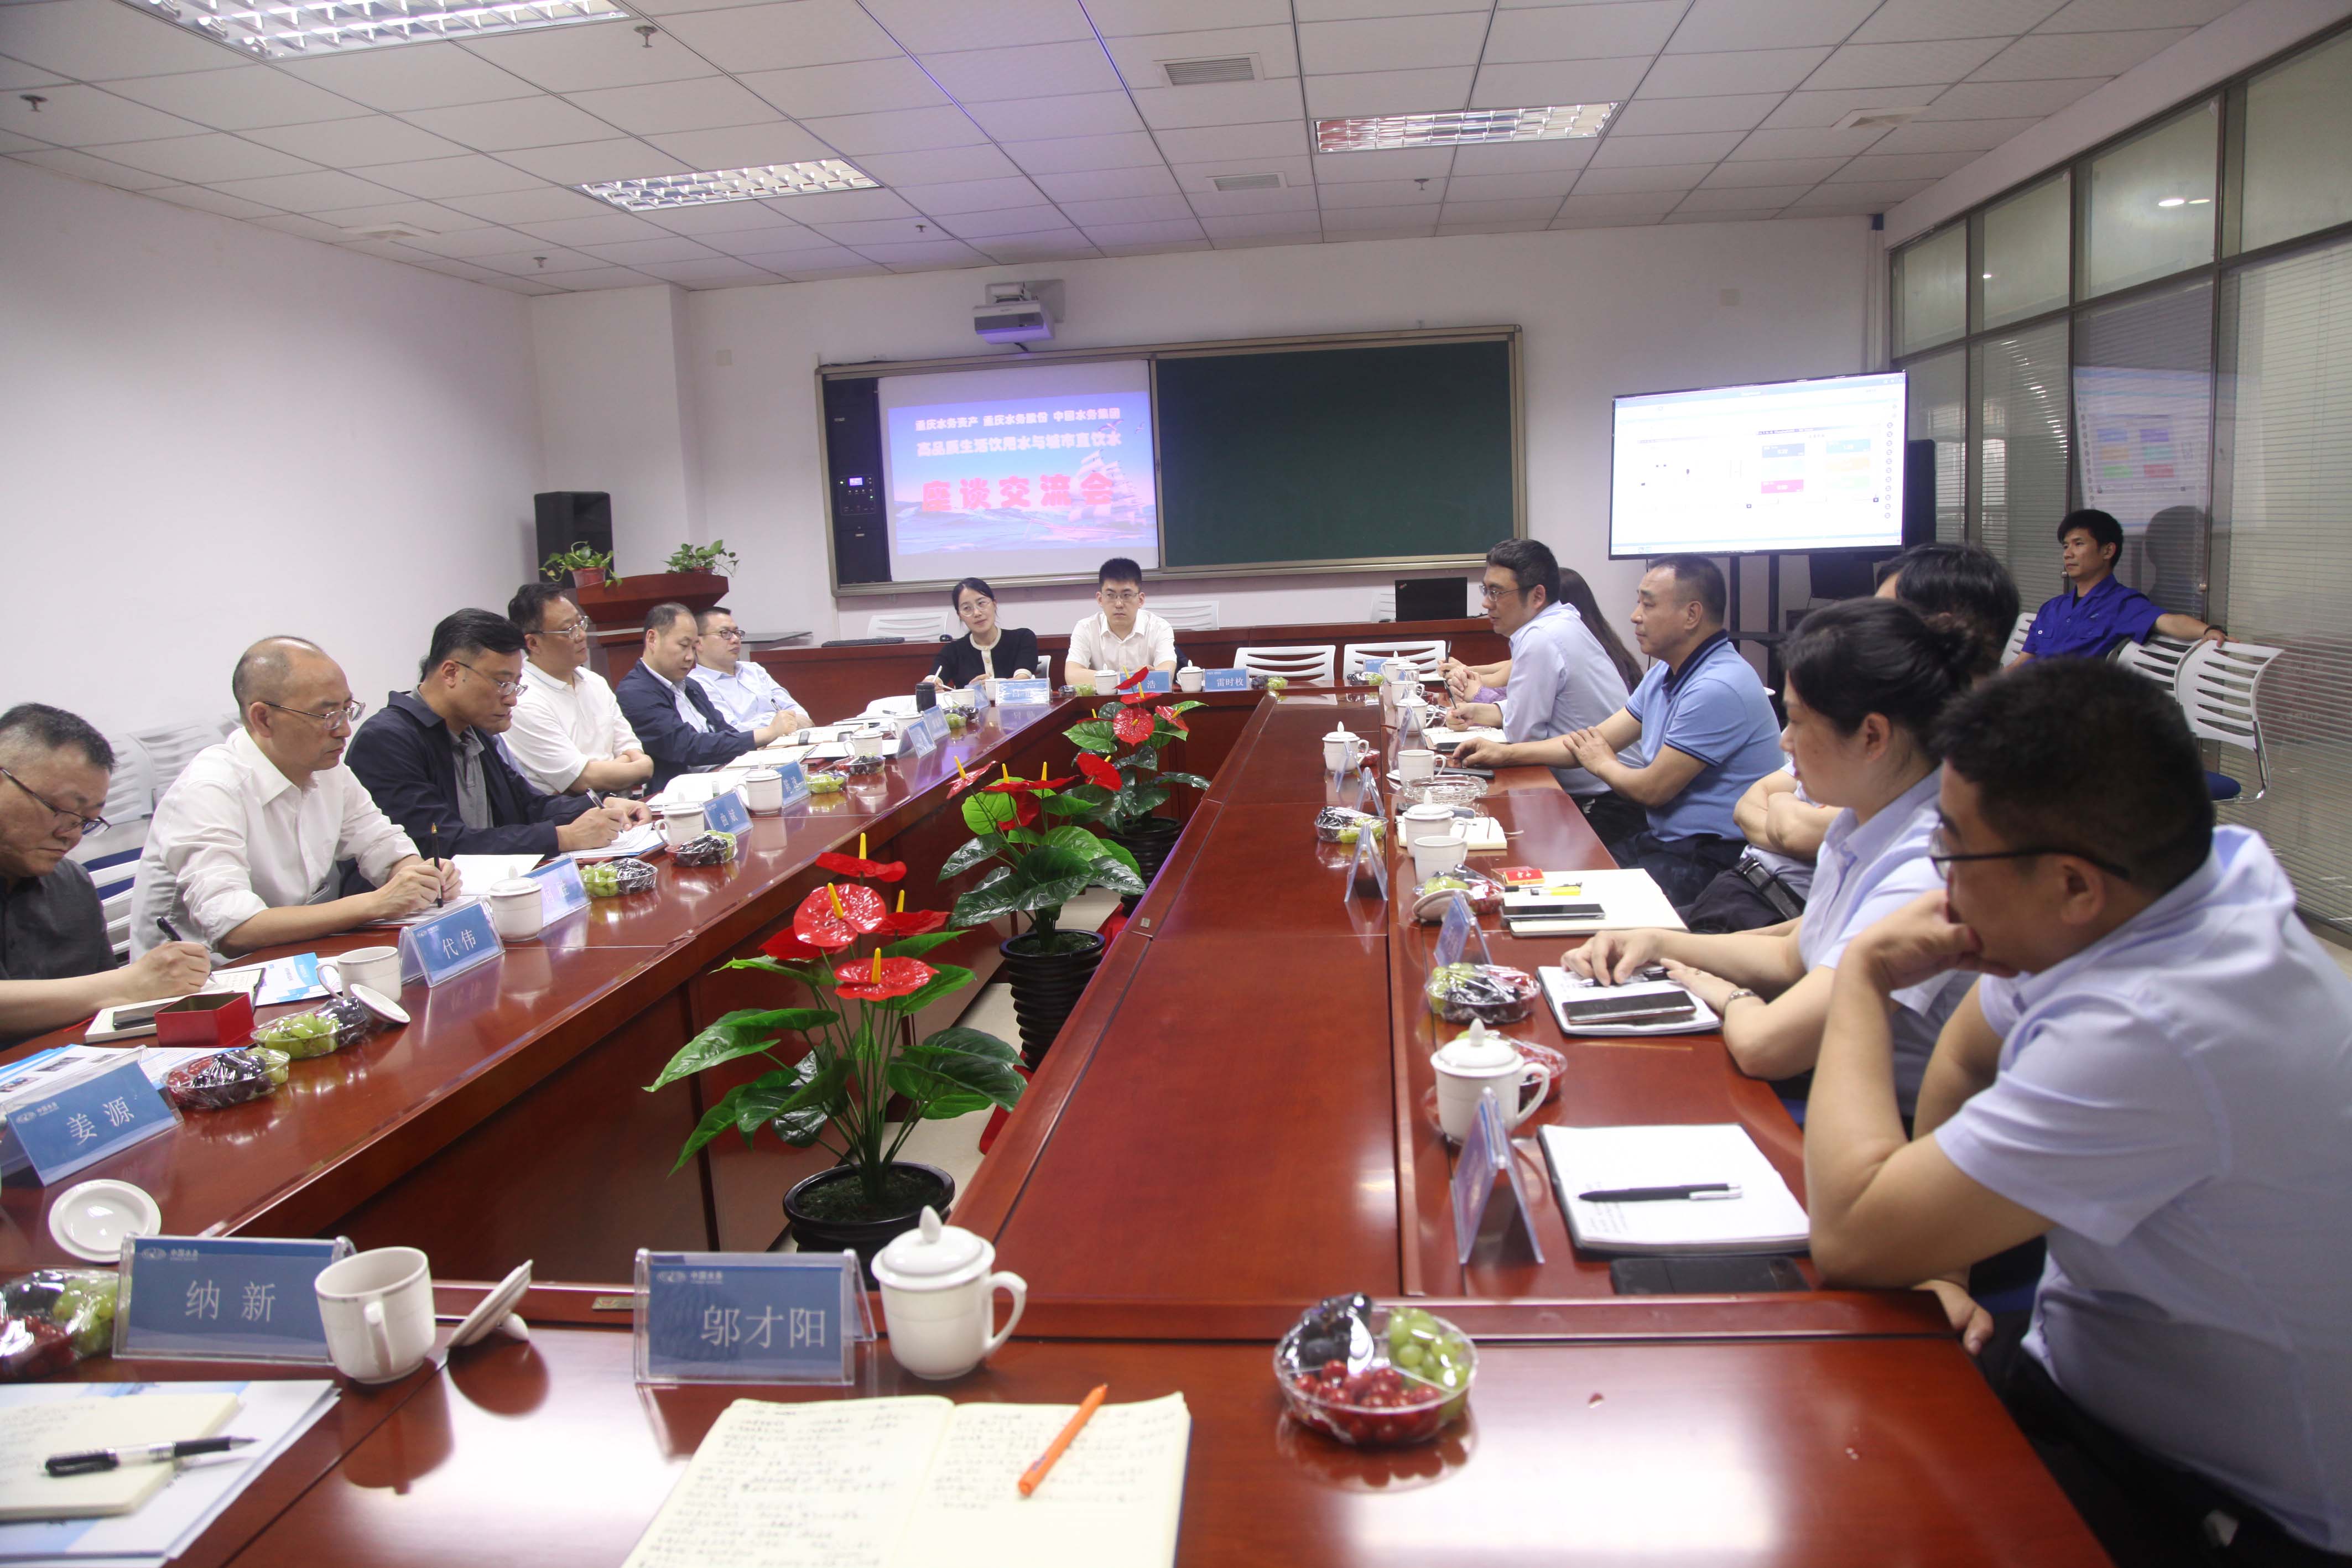 Leaders from Chongqing Water Asset Management Co., Ltd. and Chongqing Water Group visited the company for inspection and research, and had discussions and exchanges on high-quality domestic drinking water and urban direct drinking water